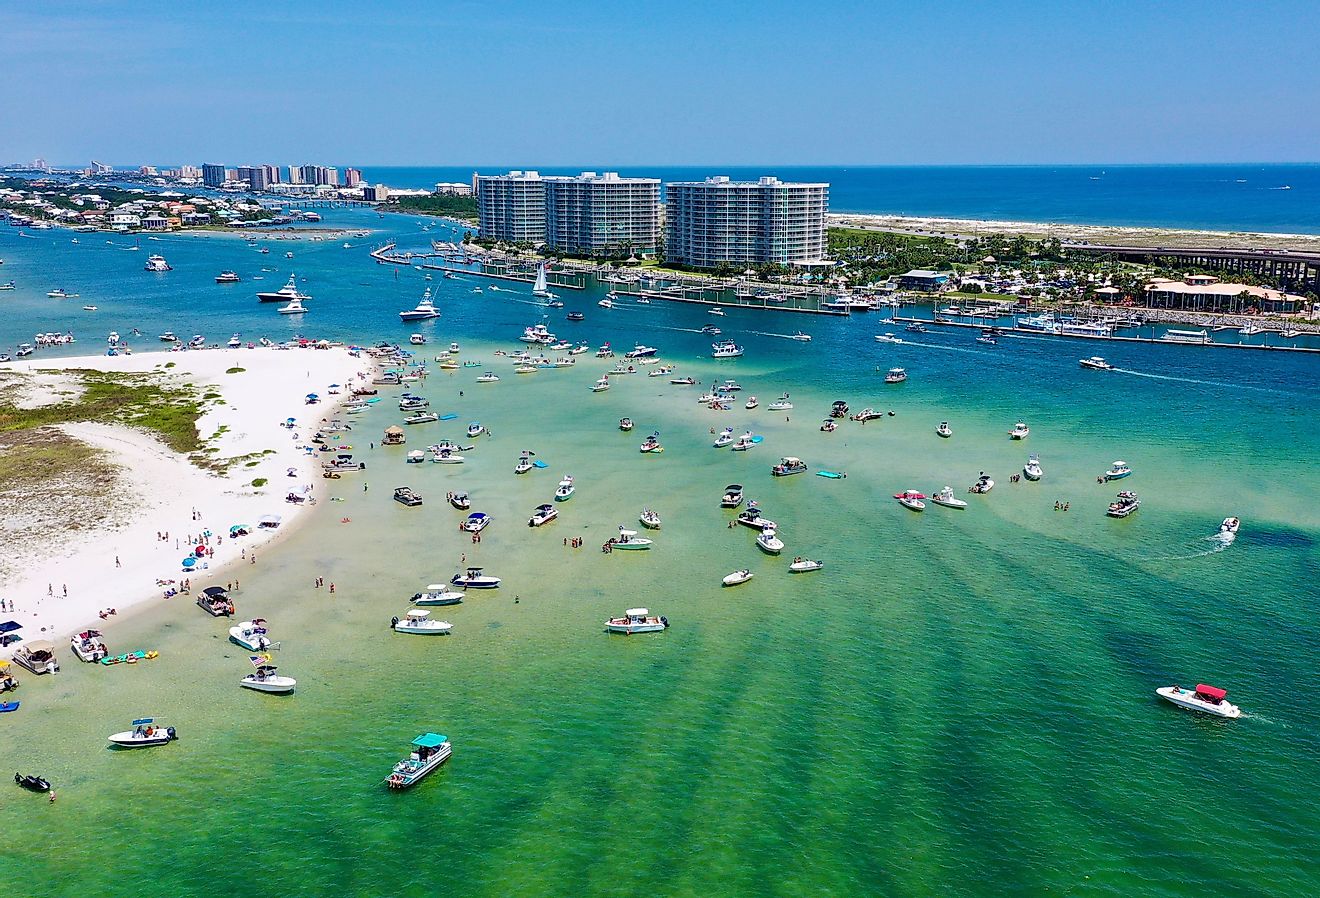 Aerial view of boats and people on the water and sandy beaches at Orange Beach, Alabama.